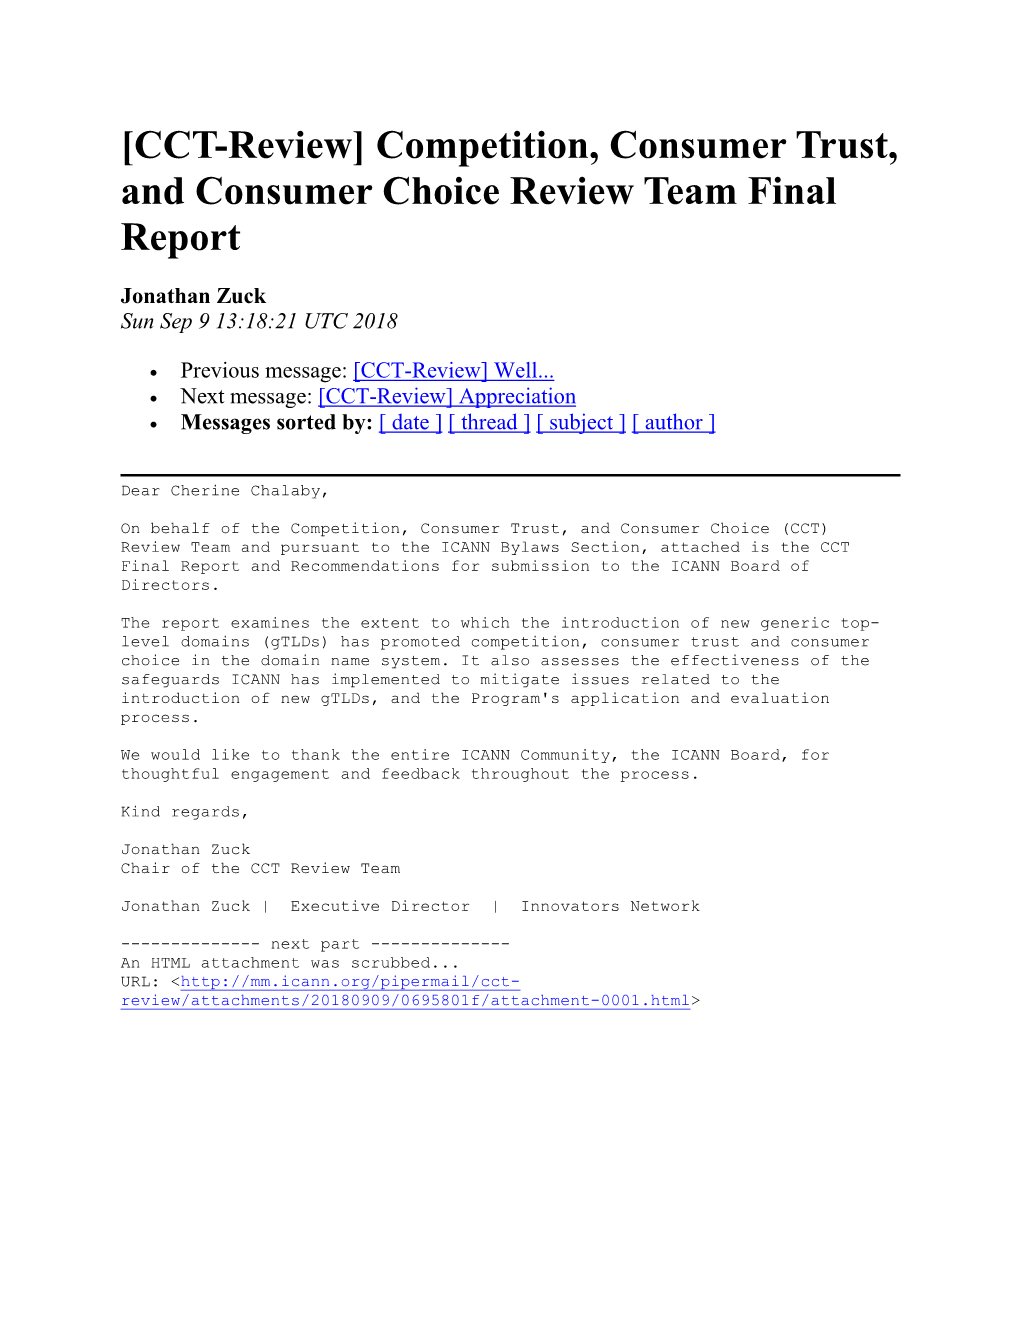 Competition, Consumer Trust, and Consumer Choice Review Team Final Report